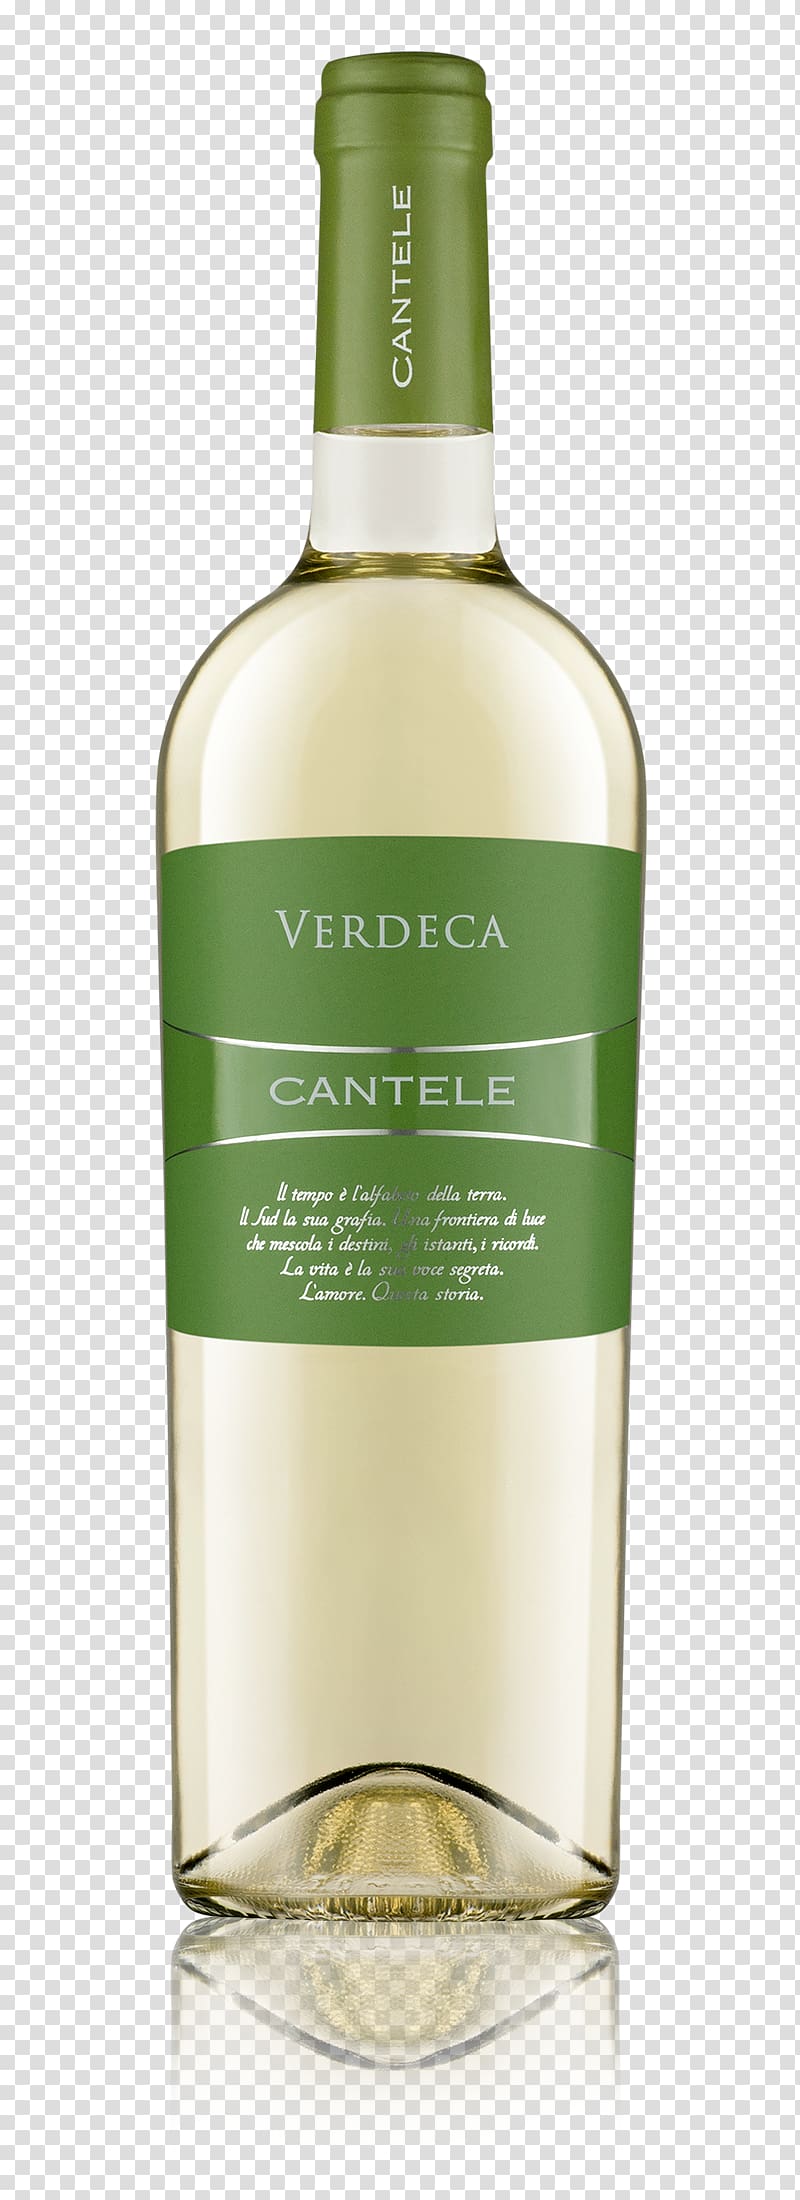 Cantele White wine Chardonnay Fiano, wine transparent background PNG clipart